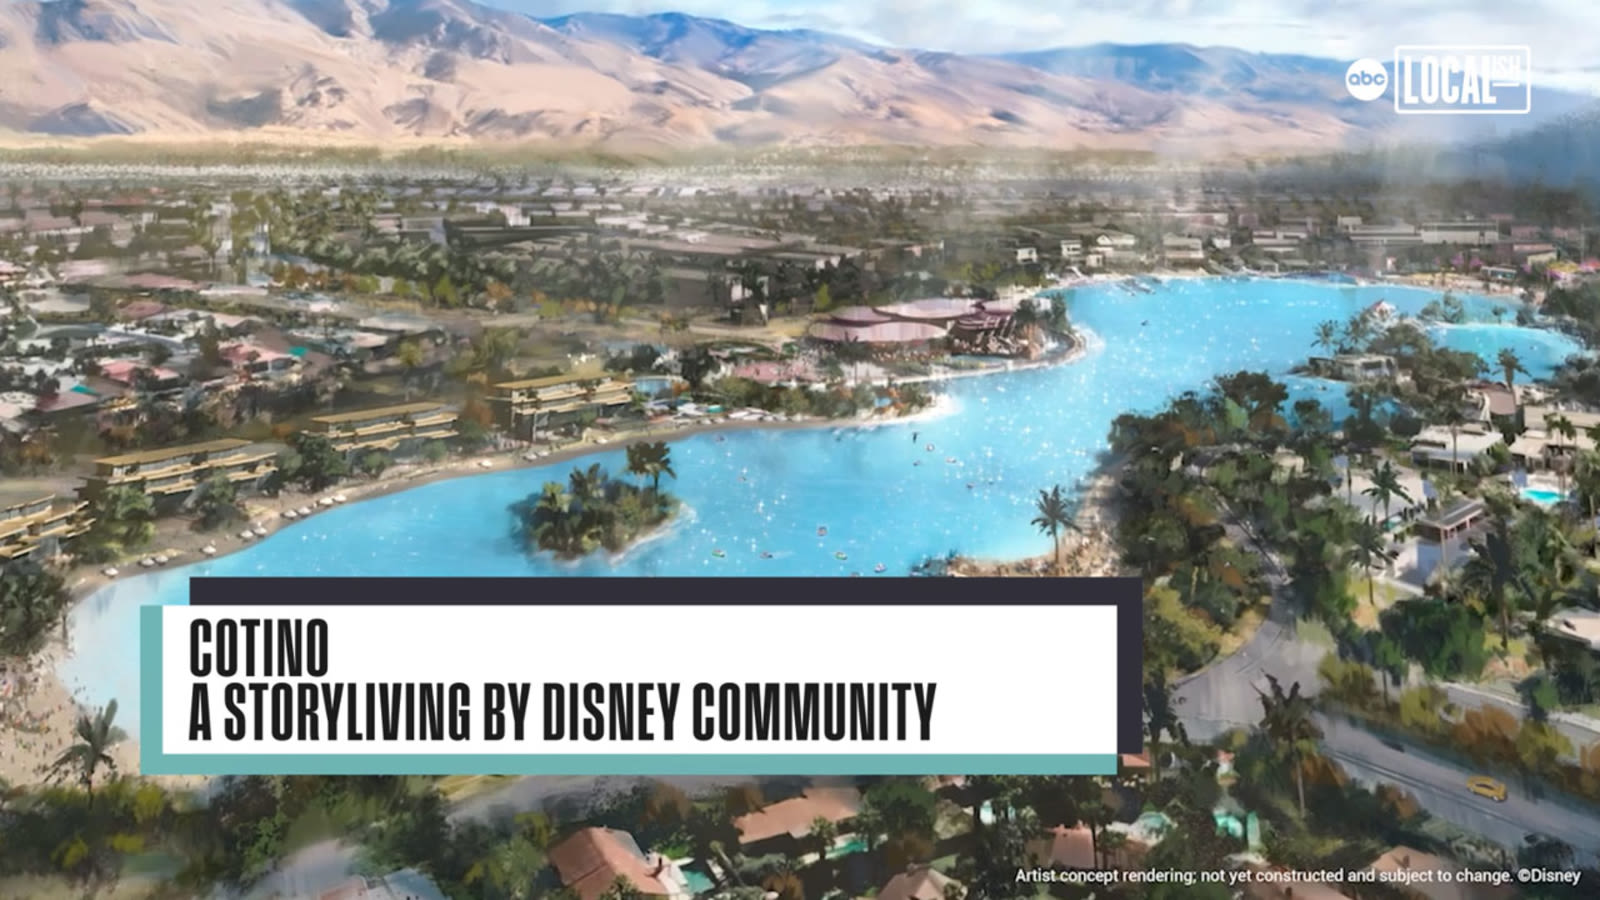 Disney's luxury Cotino community is a mid-century oasis in the heart of the Coachella Valley